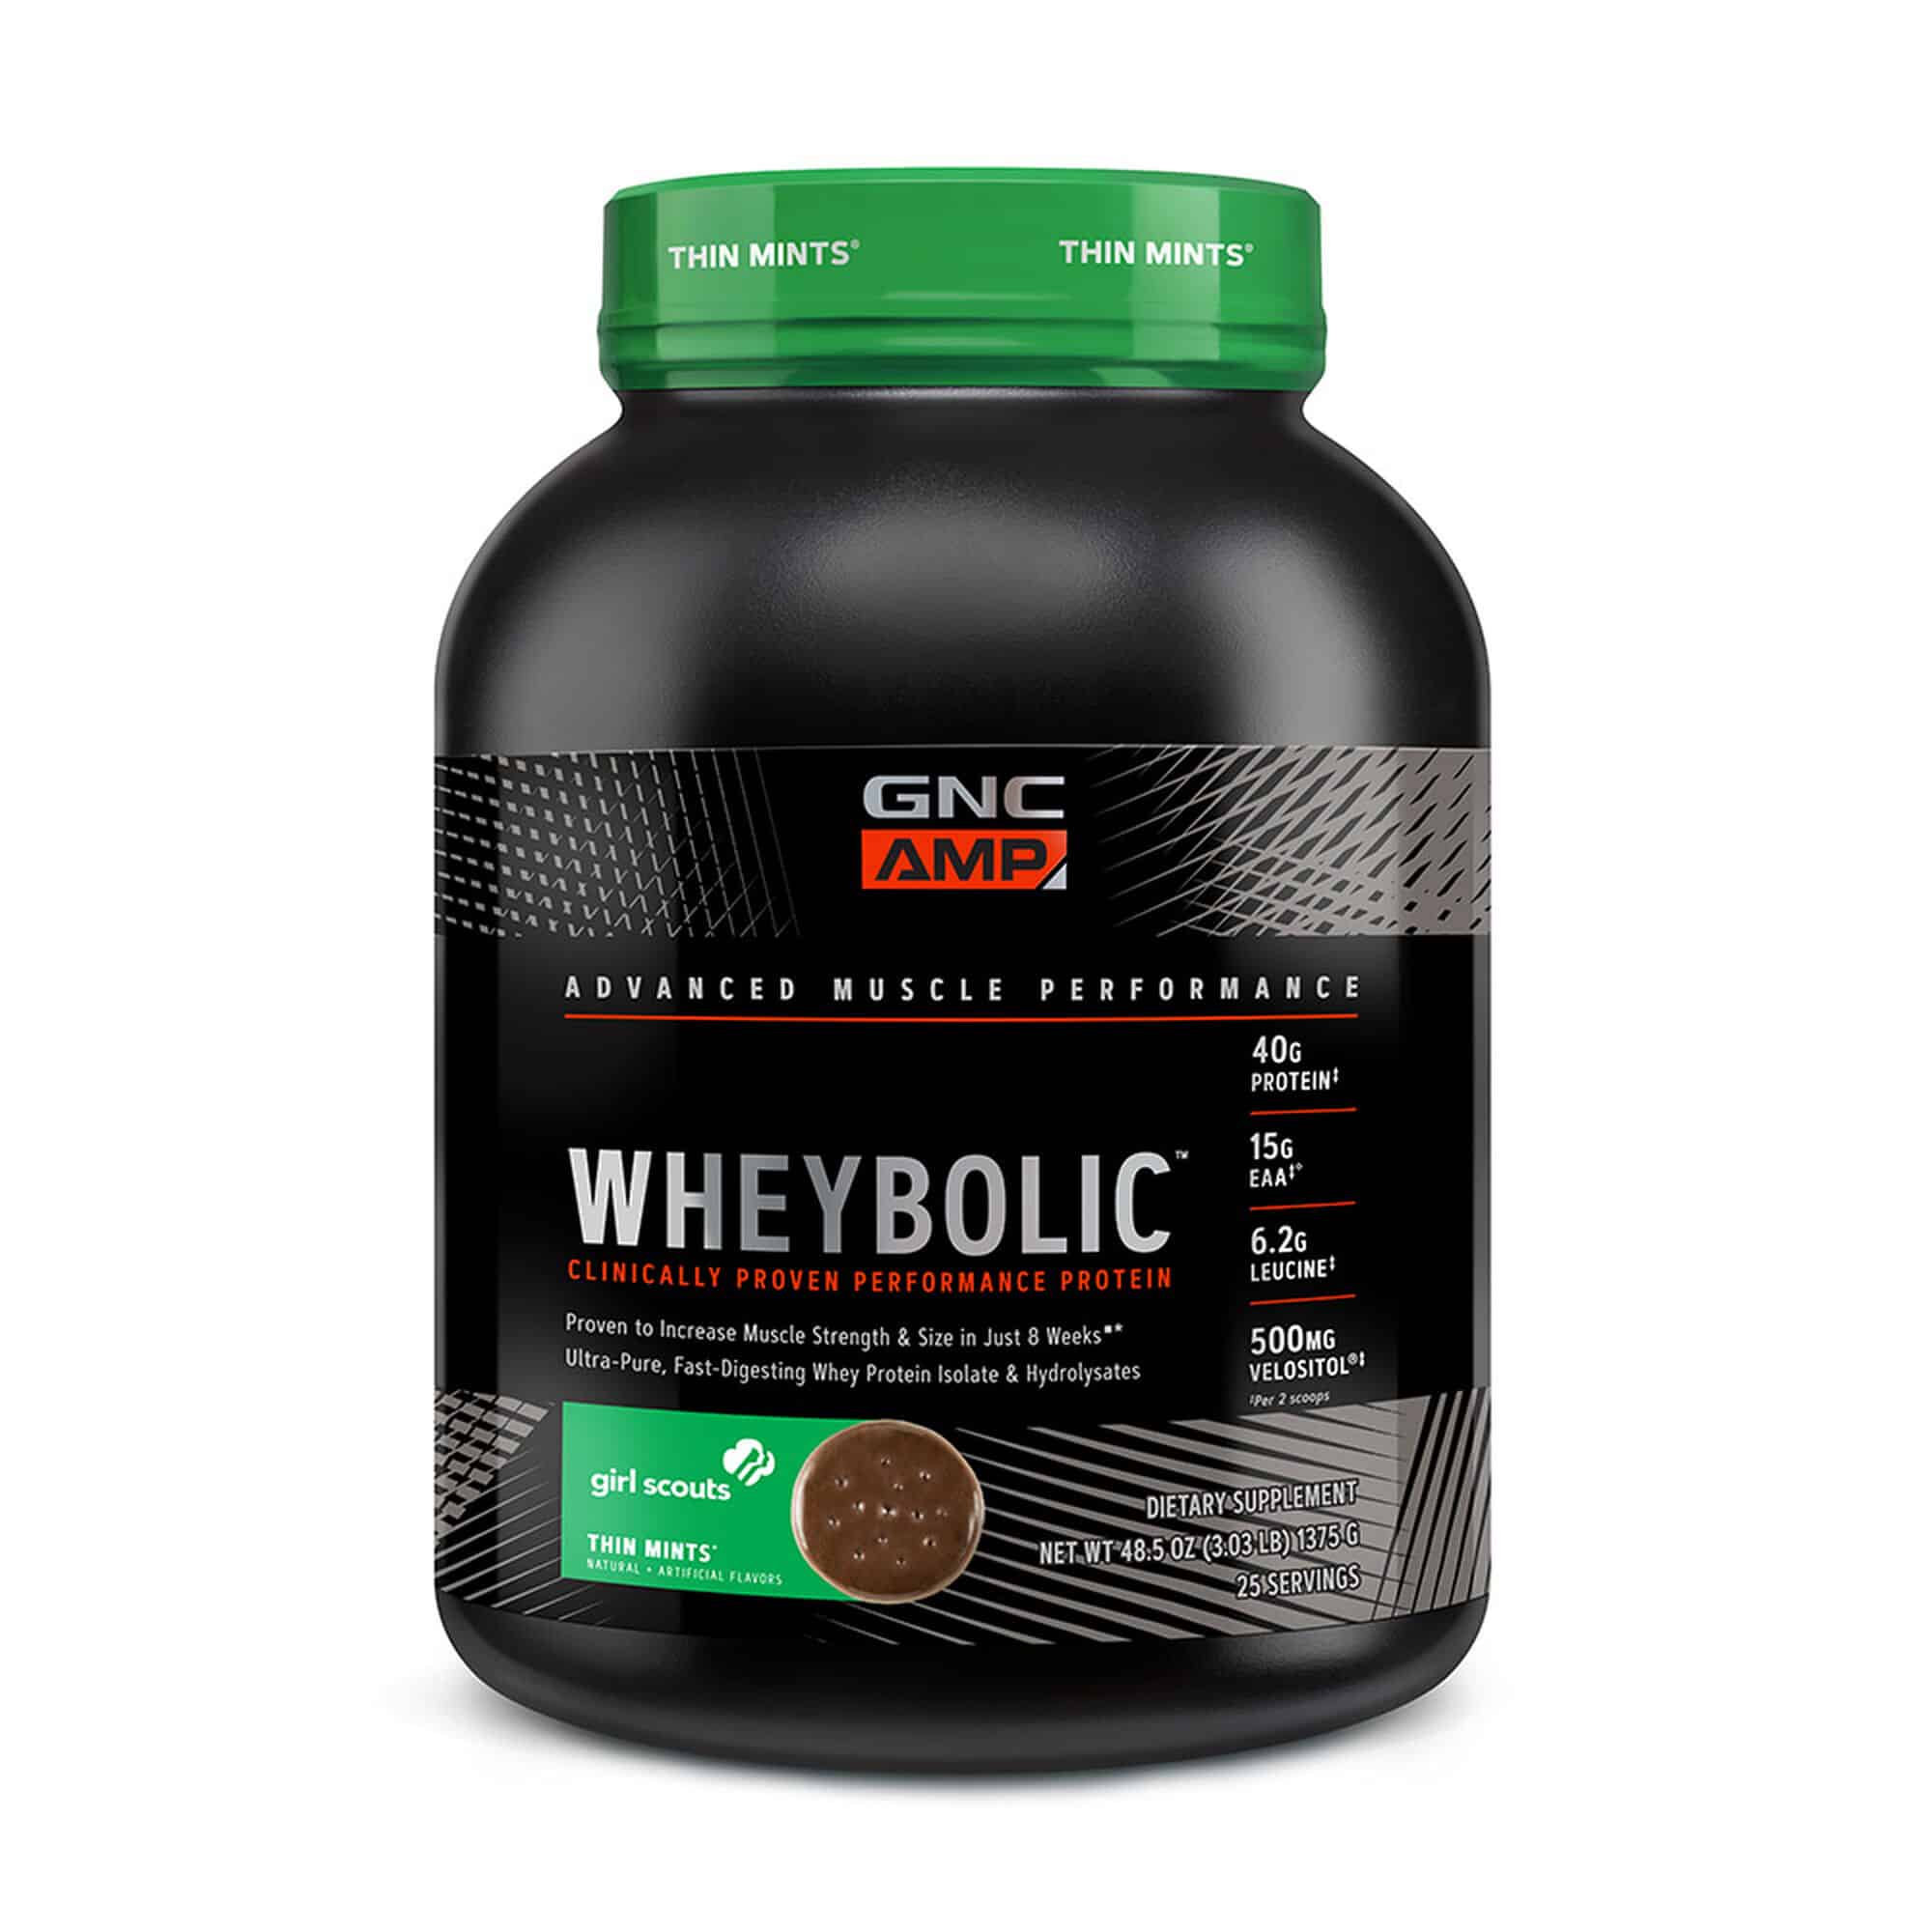 GNC AMP Wheybolic Whey Protein Flavored with Girl Scout Thin Mints!